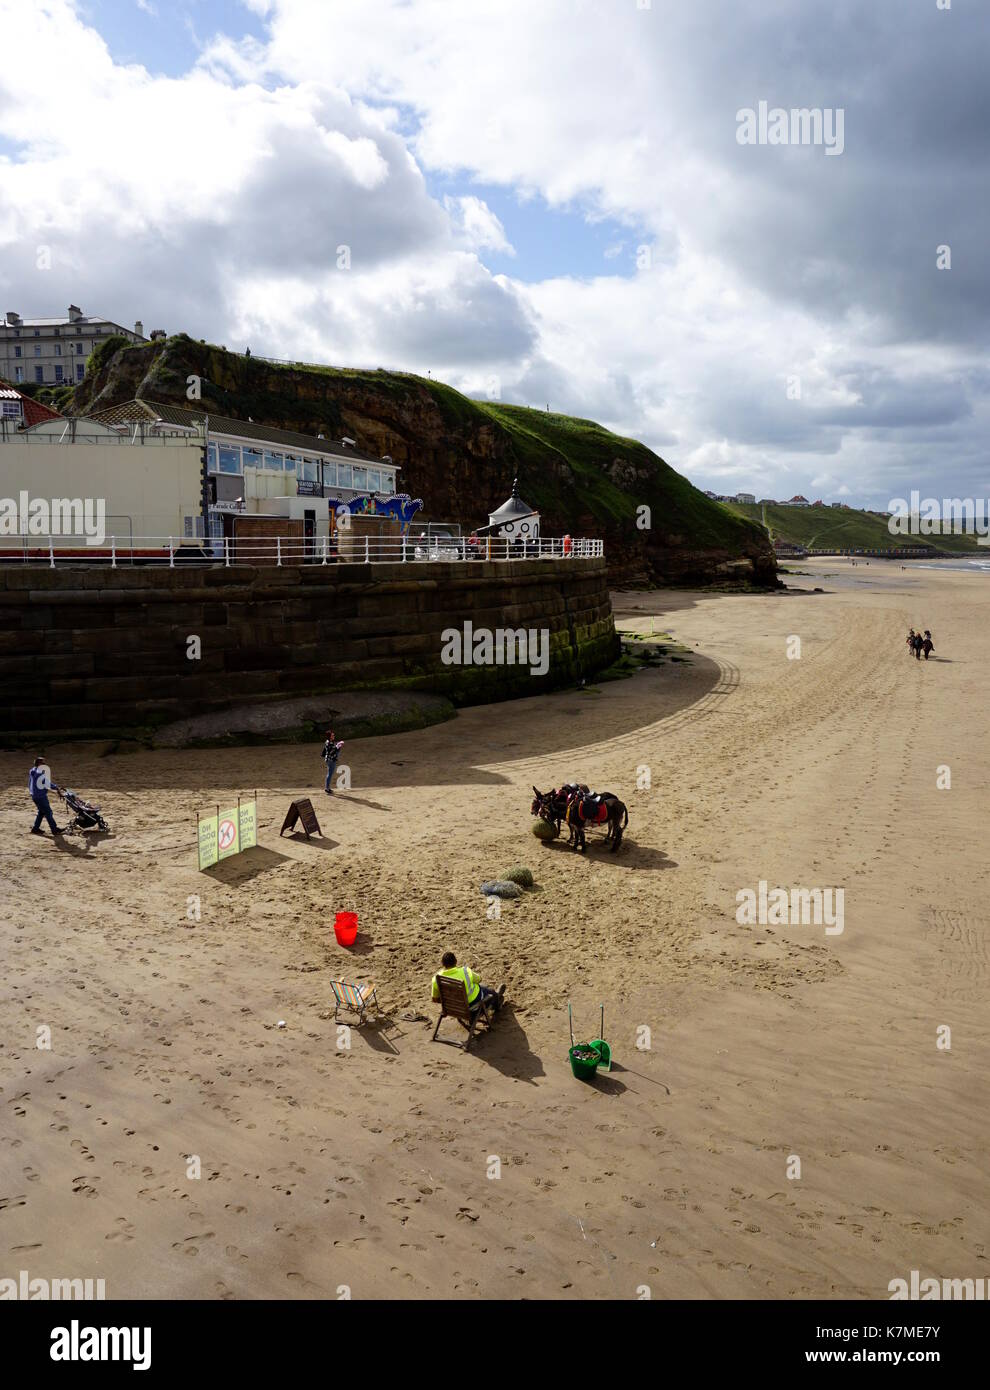 Donkey rides add to a great day at the seaside. Stock Photo